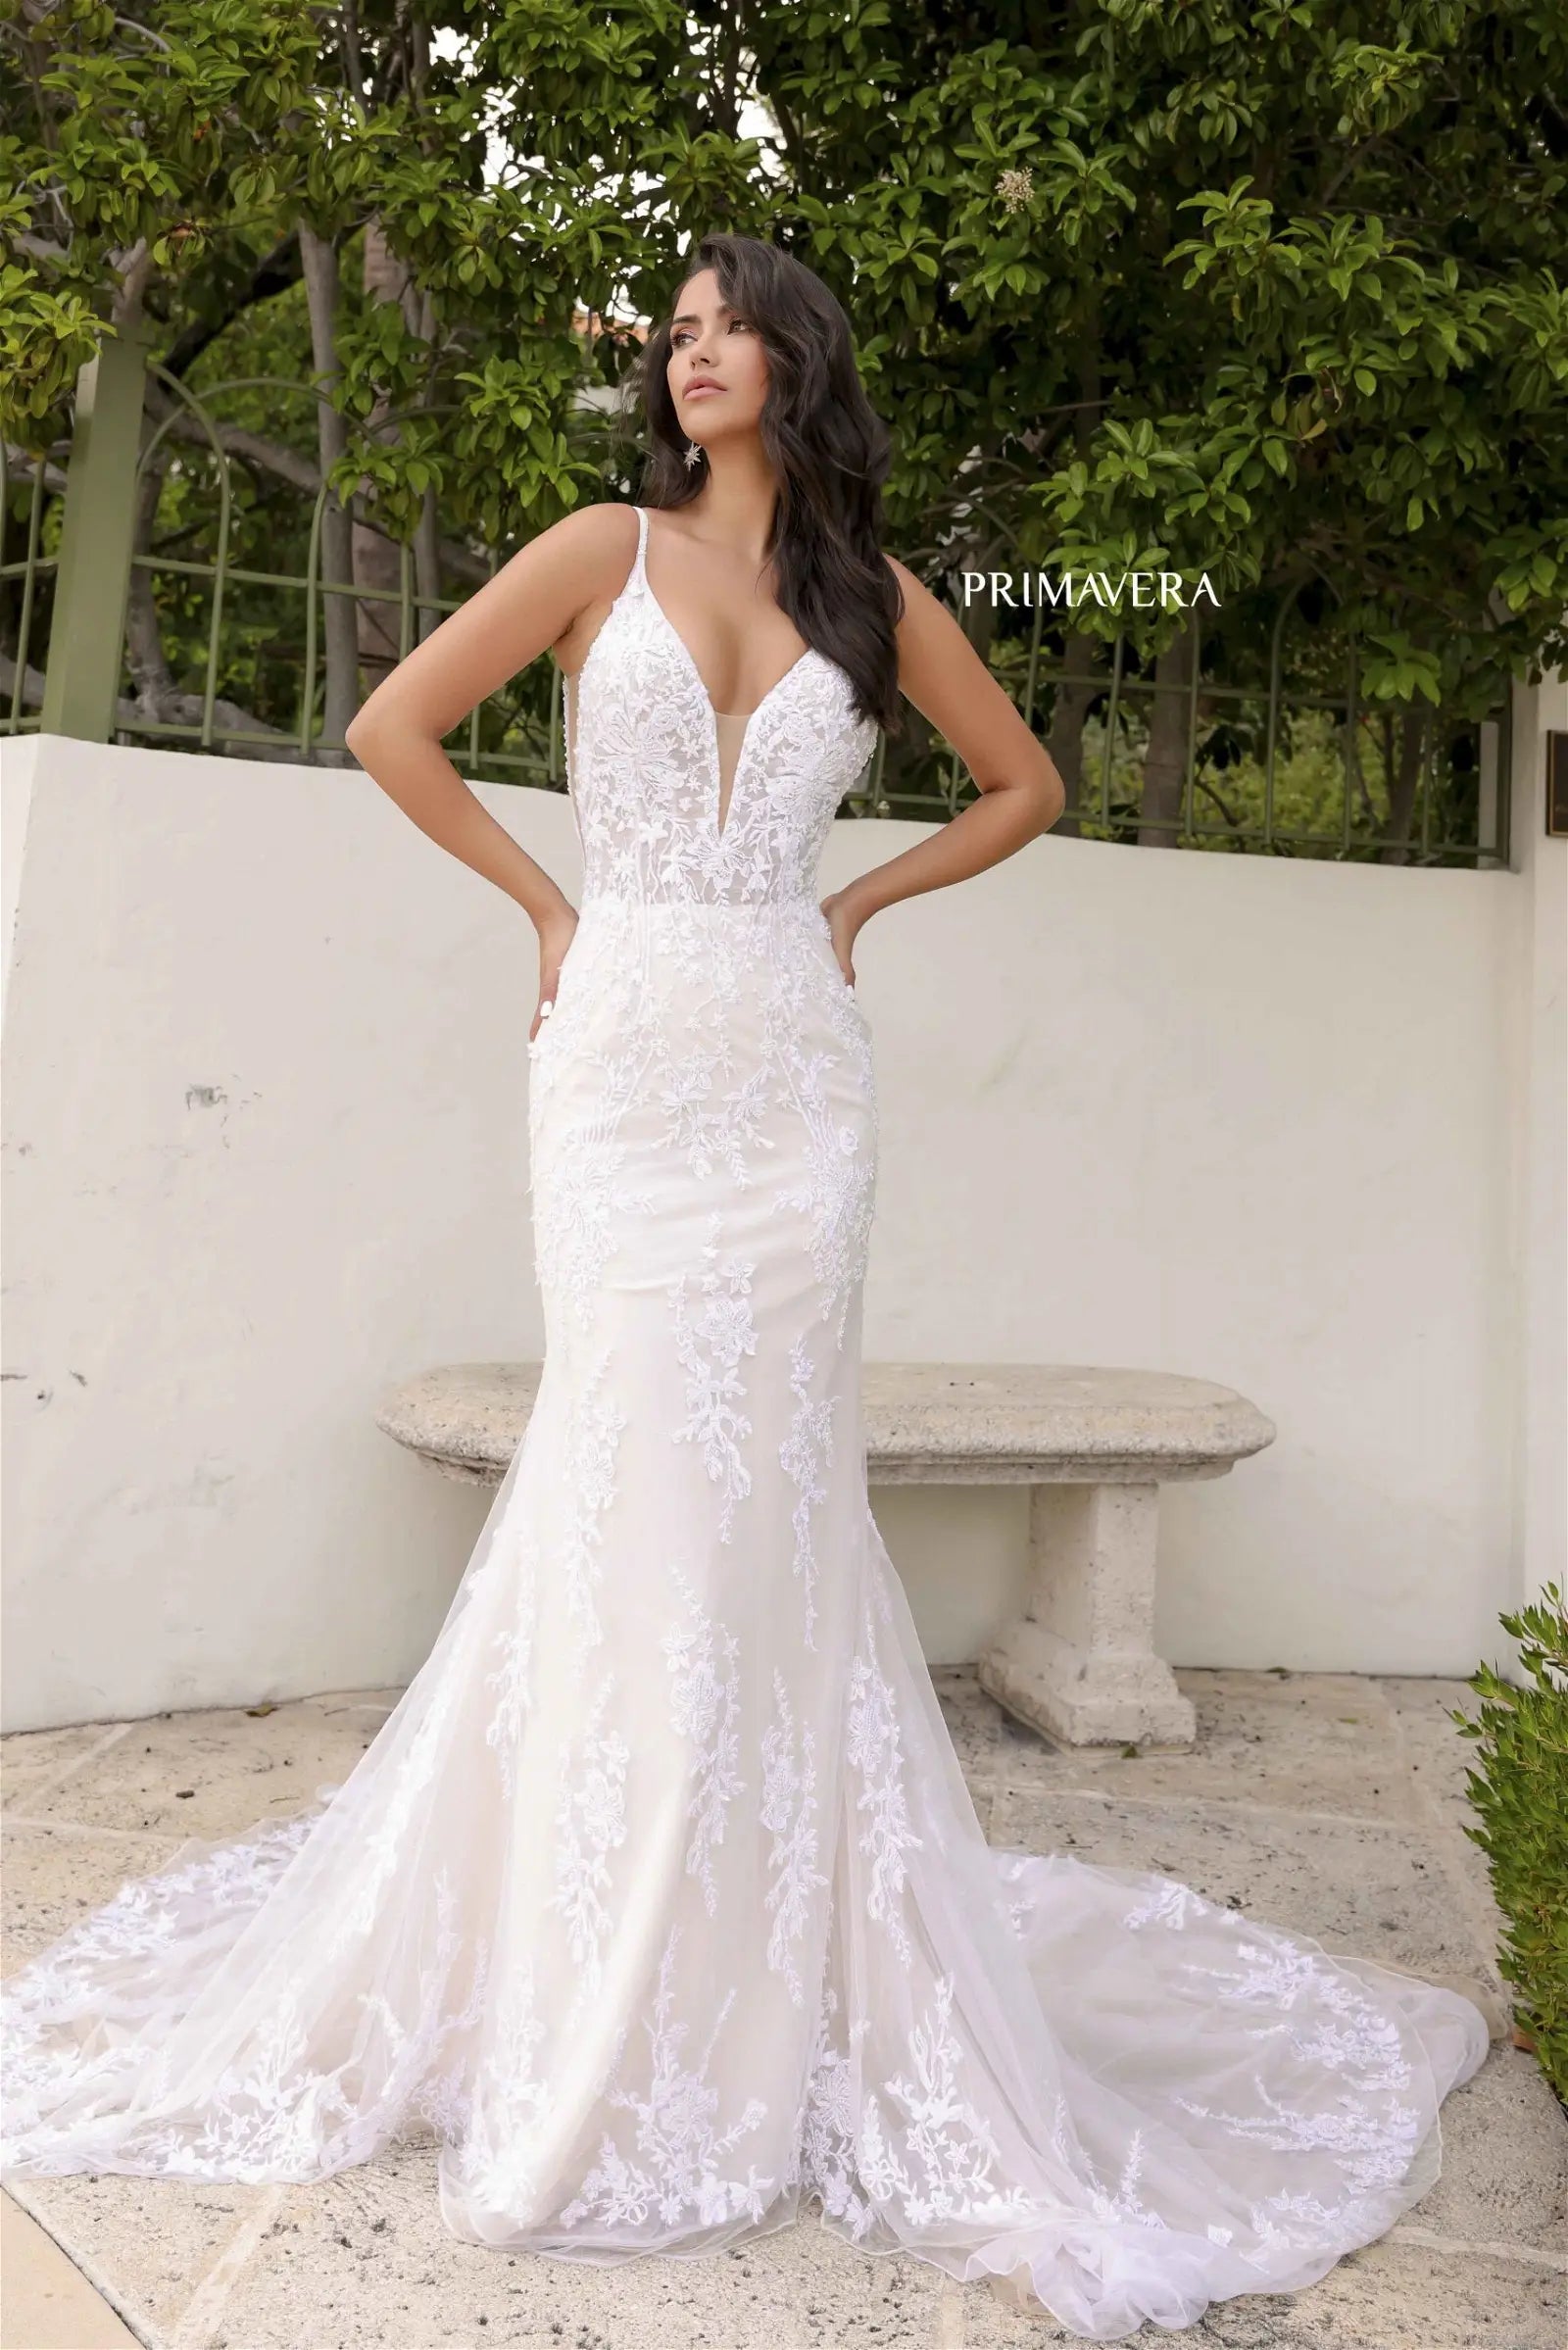 Sweetheart Neckline Lace Corset Mermaid Bridal Gowns Train Beaded